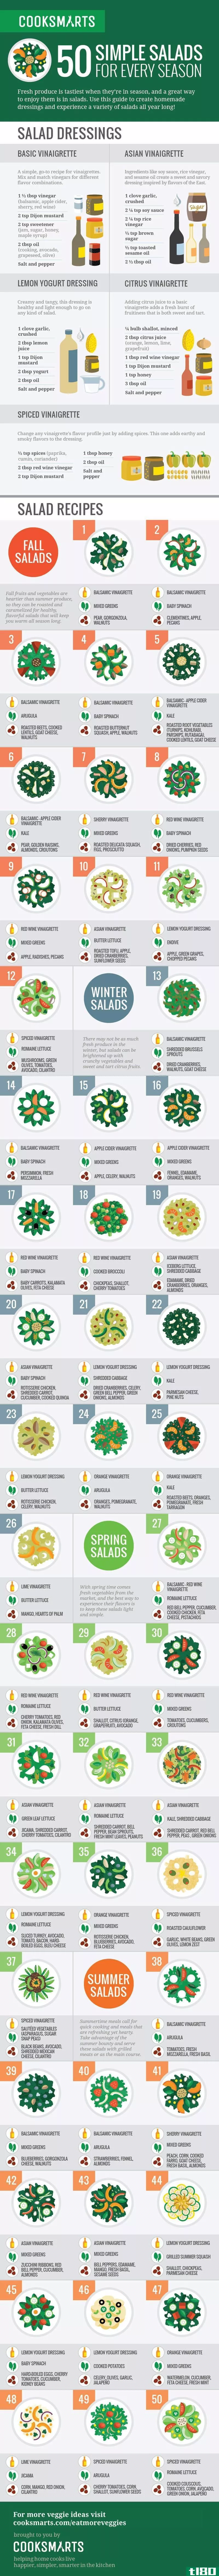 Illustration for article titled This Infographic Shows 50 Salad Ideas for Enjoying All Year Round